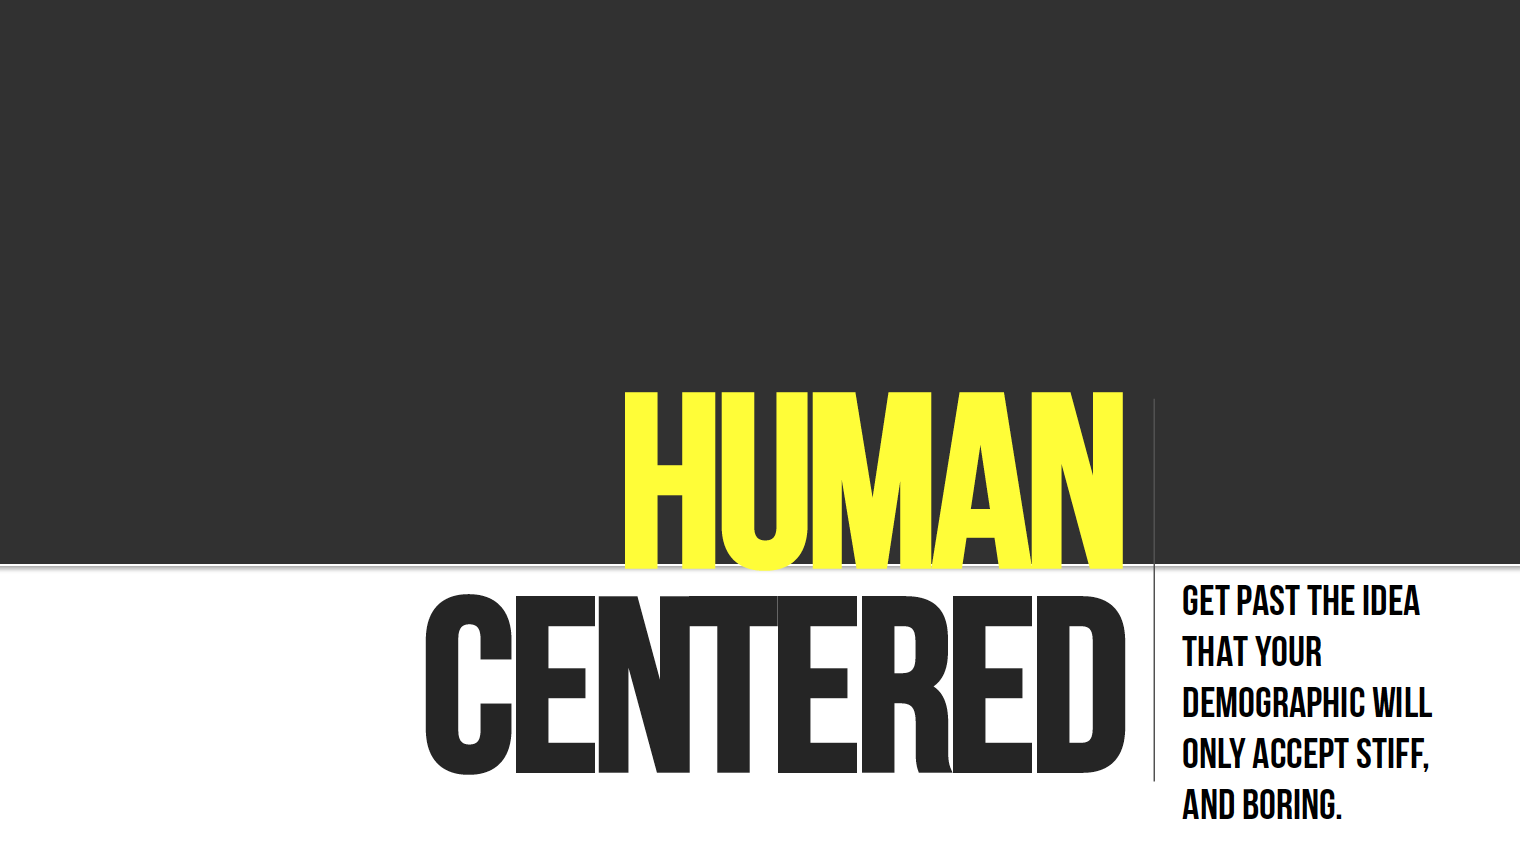 Human centered content: GET PAST THE IDEA THAT YOUR DEMOGRAPHIC WILL ONLY ACCEPT STIFF, AND BORING.